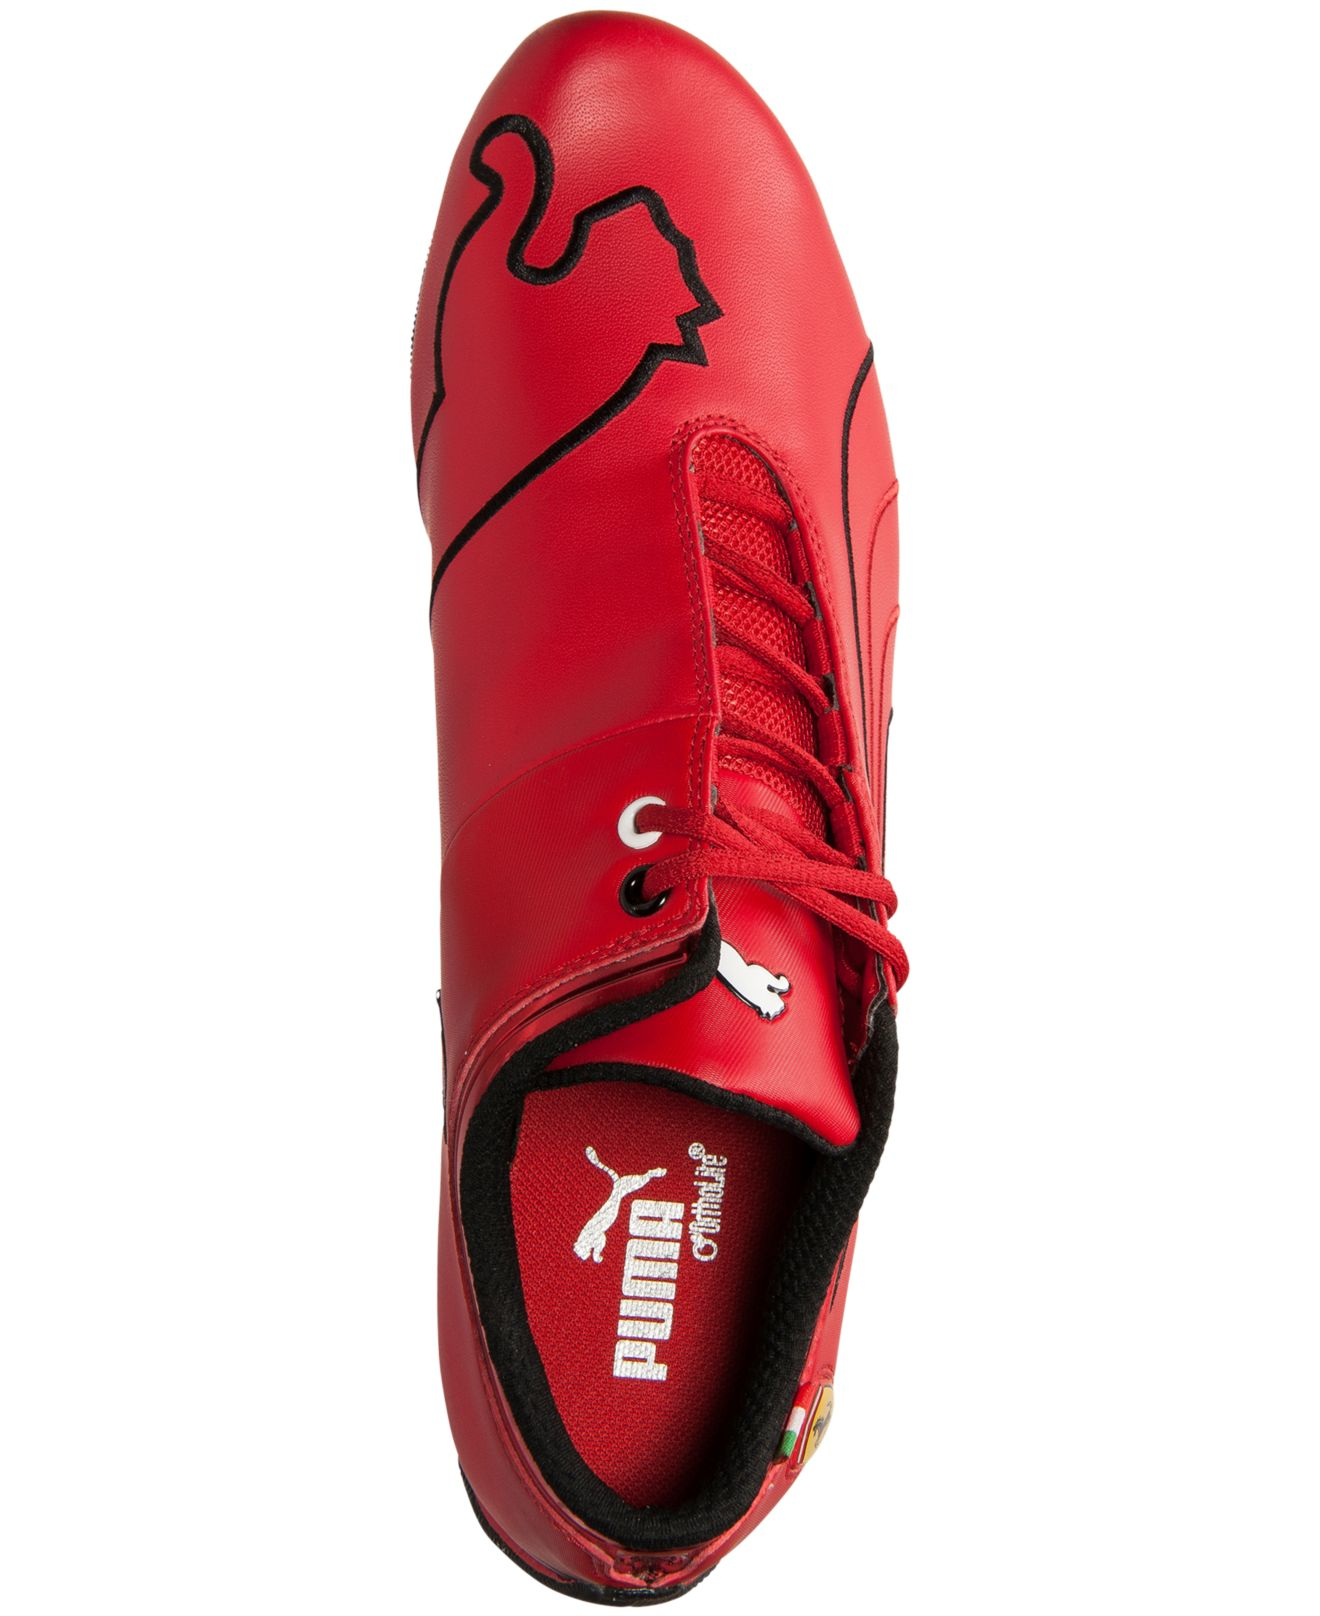 PUMA Lace Men's Future Cat M1 Sf Ferrari Casual Sneakers From Finish Line  in Red/Black (Red) for Men - Lyst